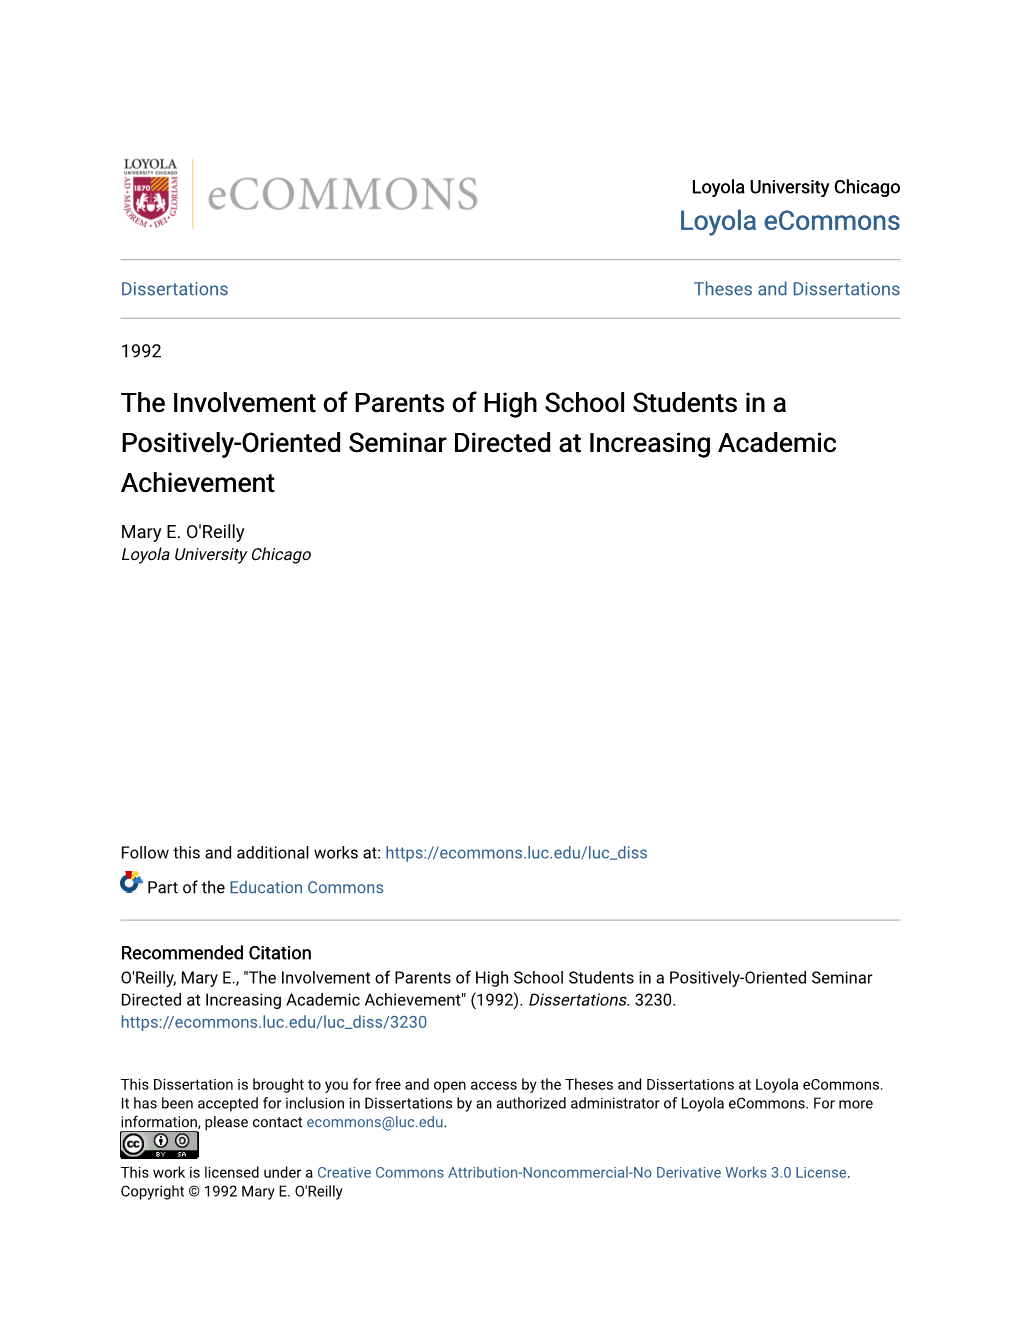 The Involvement of Parents of High School Students in a Positively-Oriented Seminar Directed at Increasing Academic Achievement